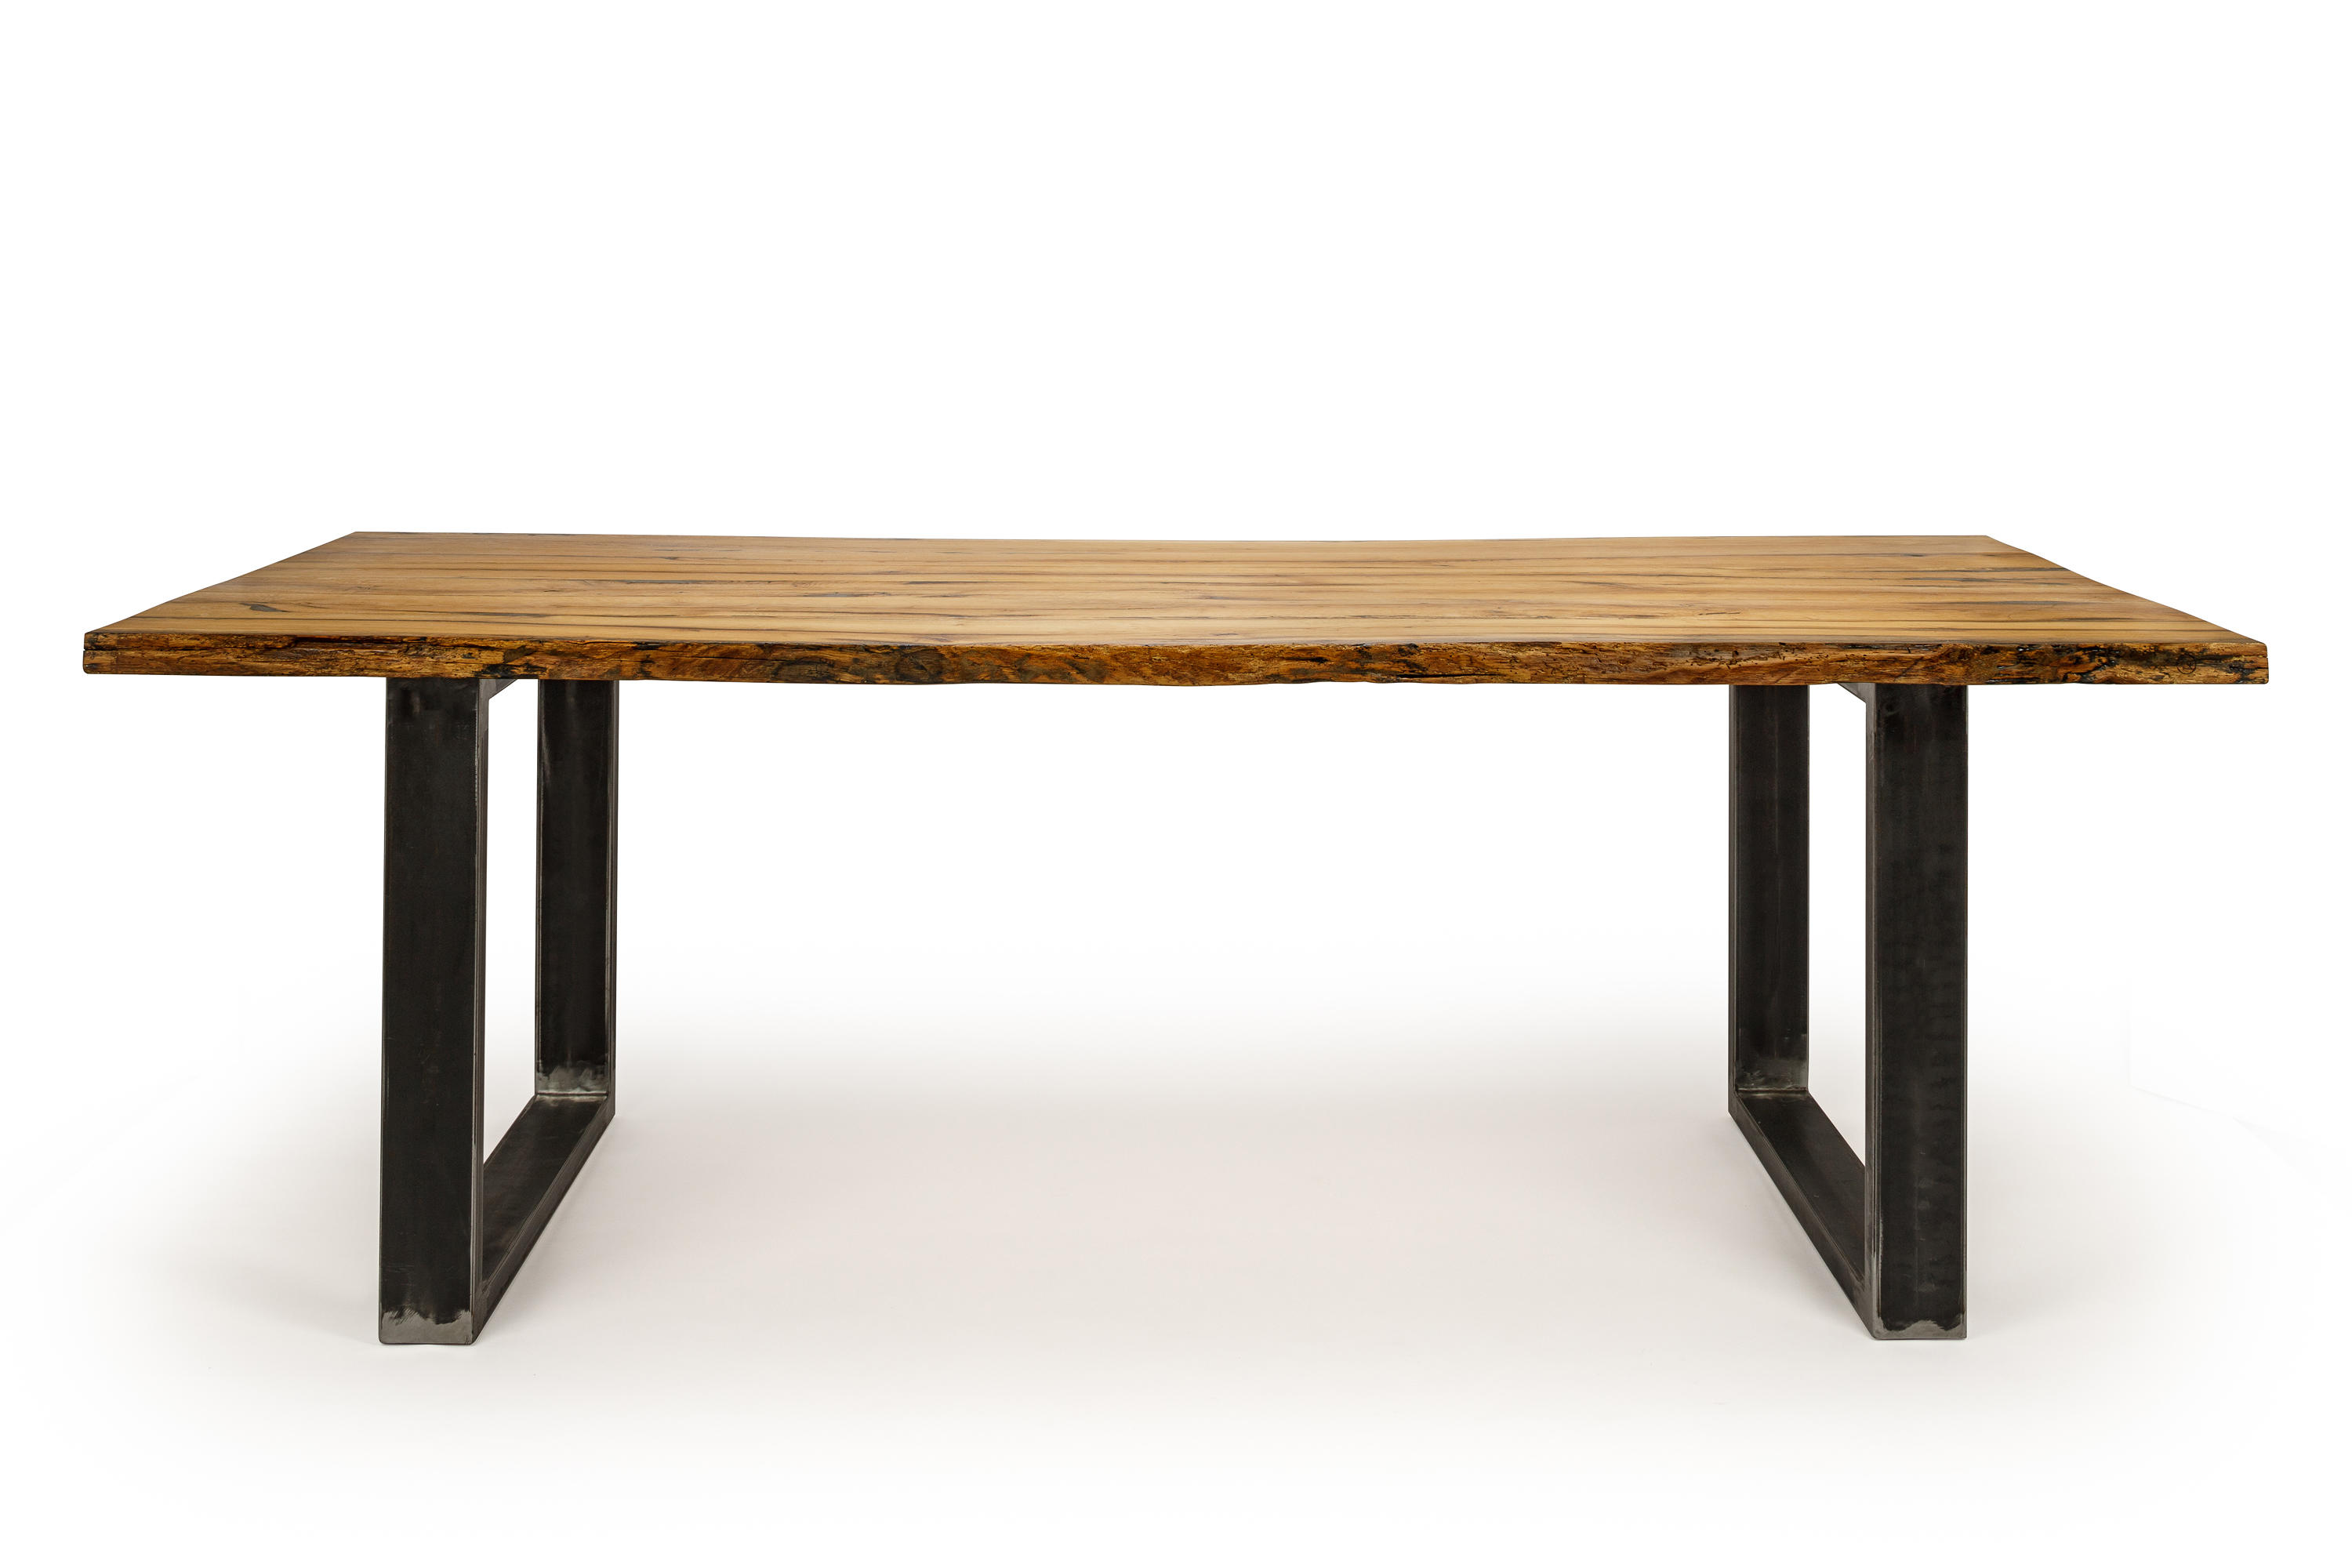 Two Elements Table Made Of Reclaimed Wood Architonic